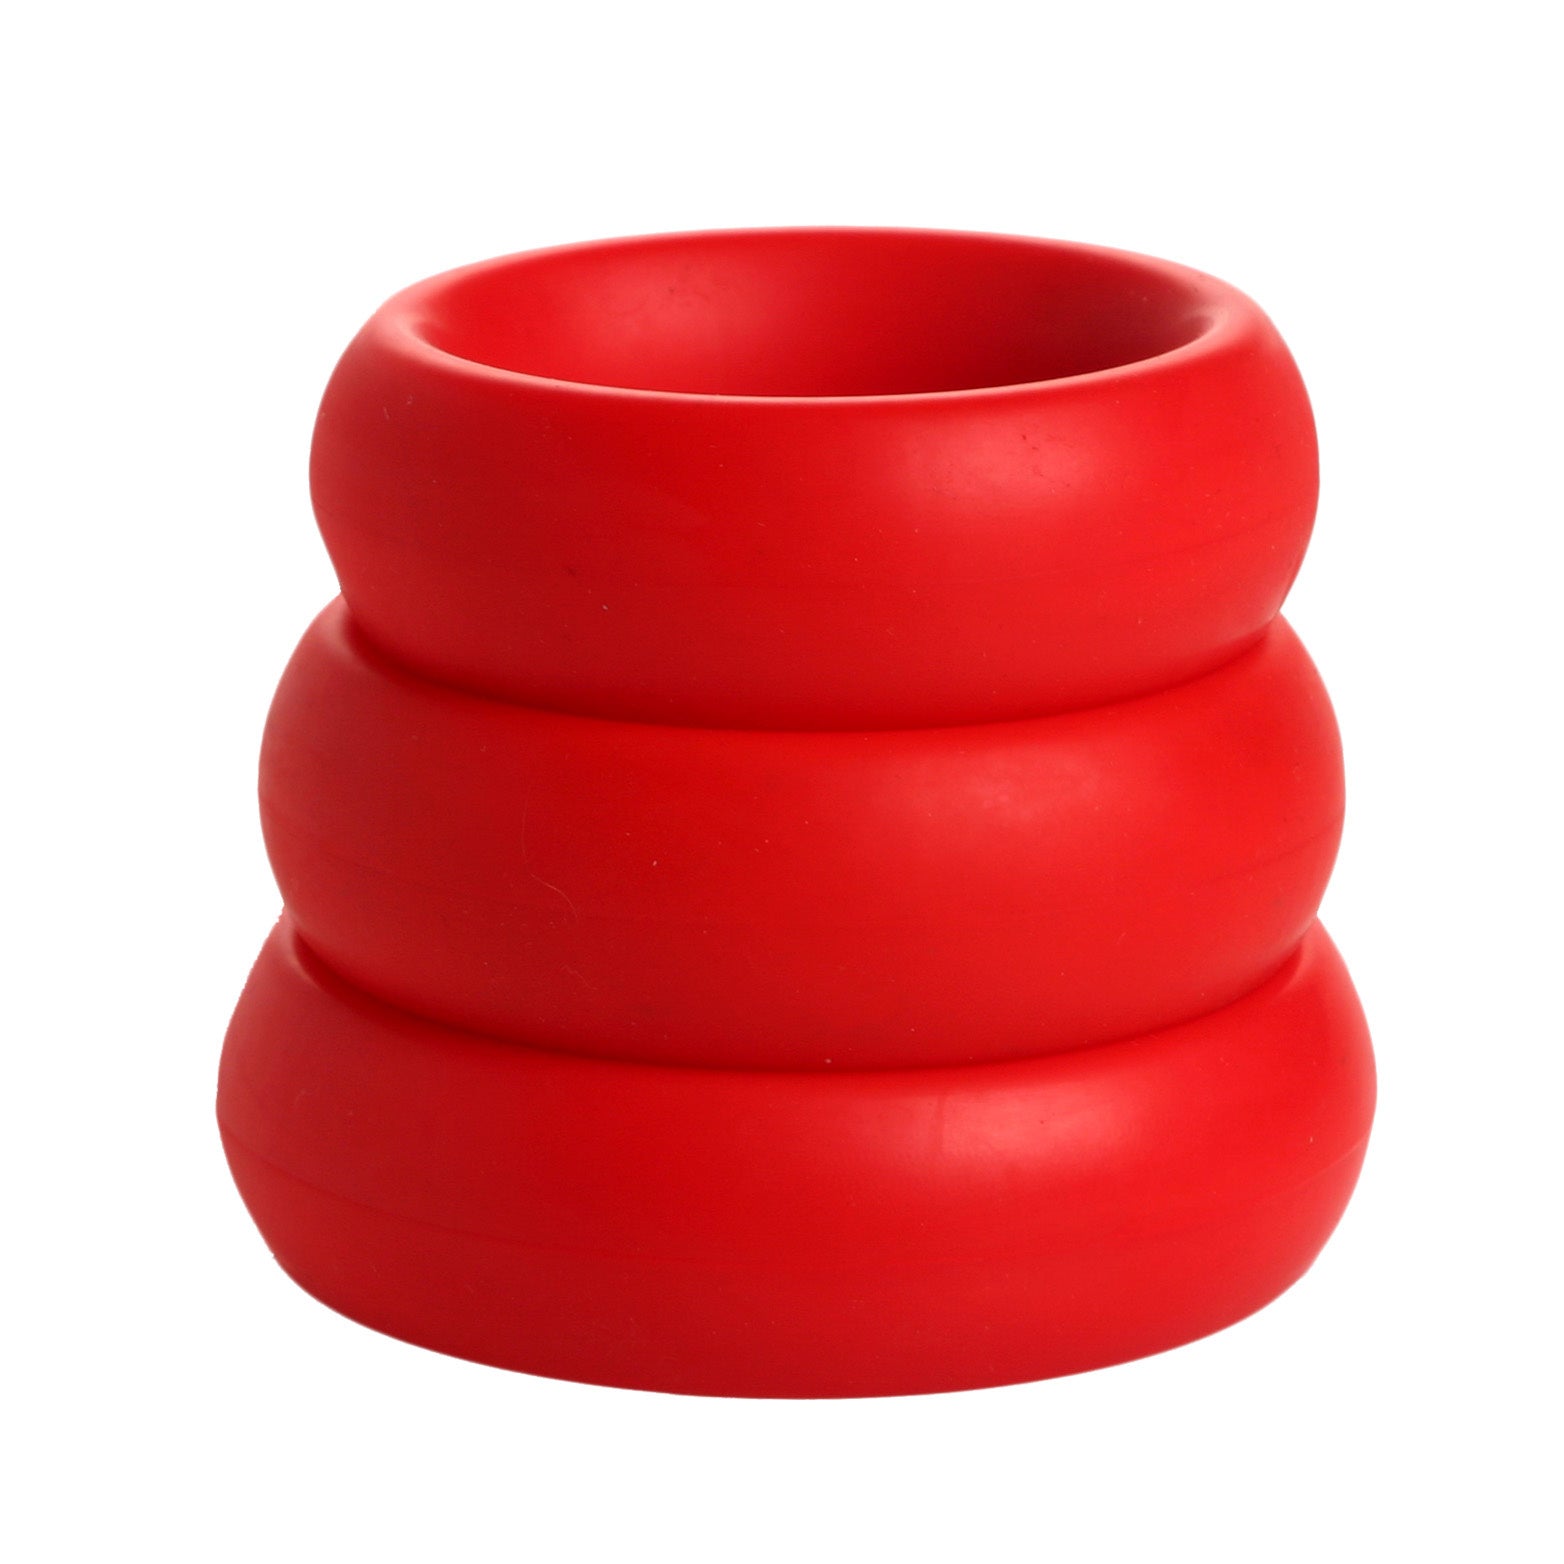 3 Piece Silicone Cock Ring Set - Red - UABDSM